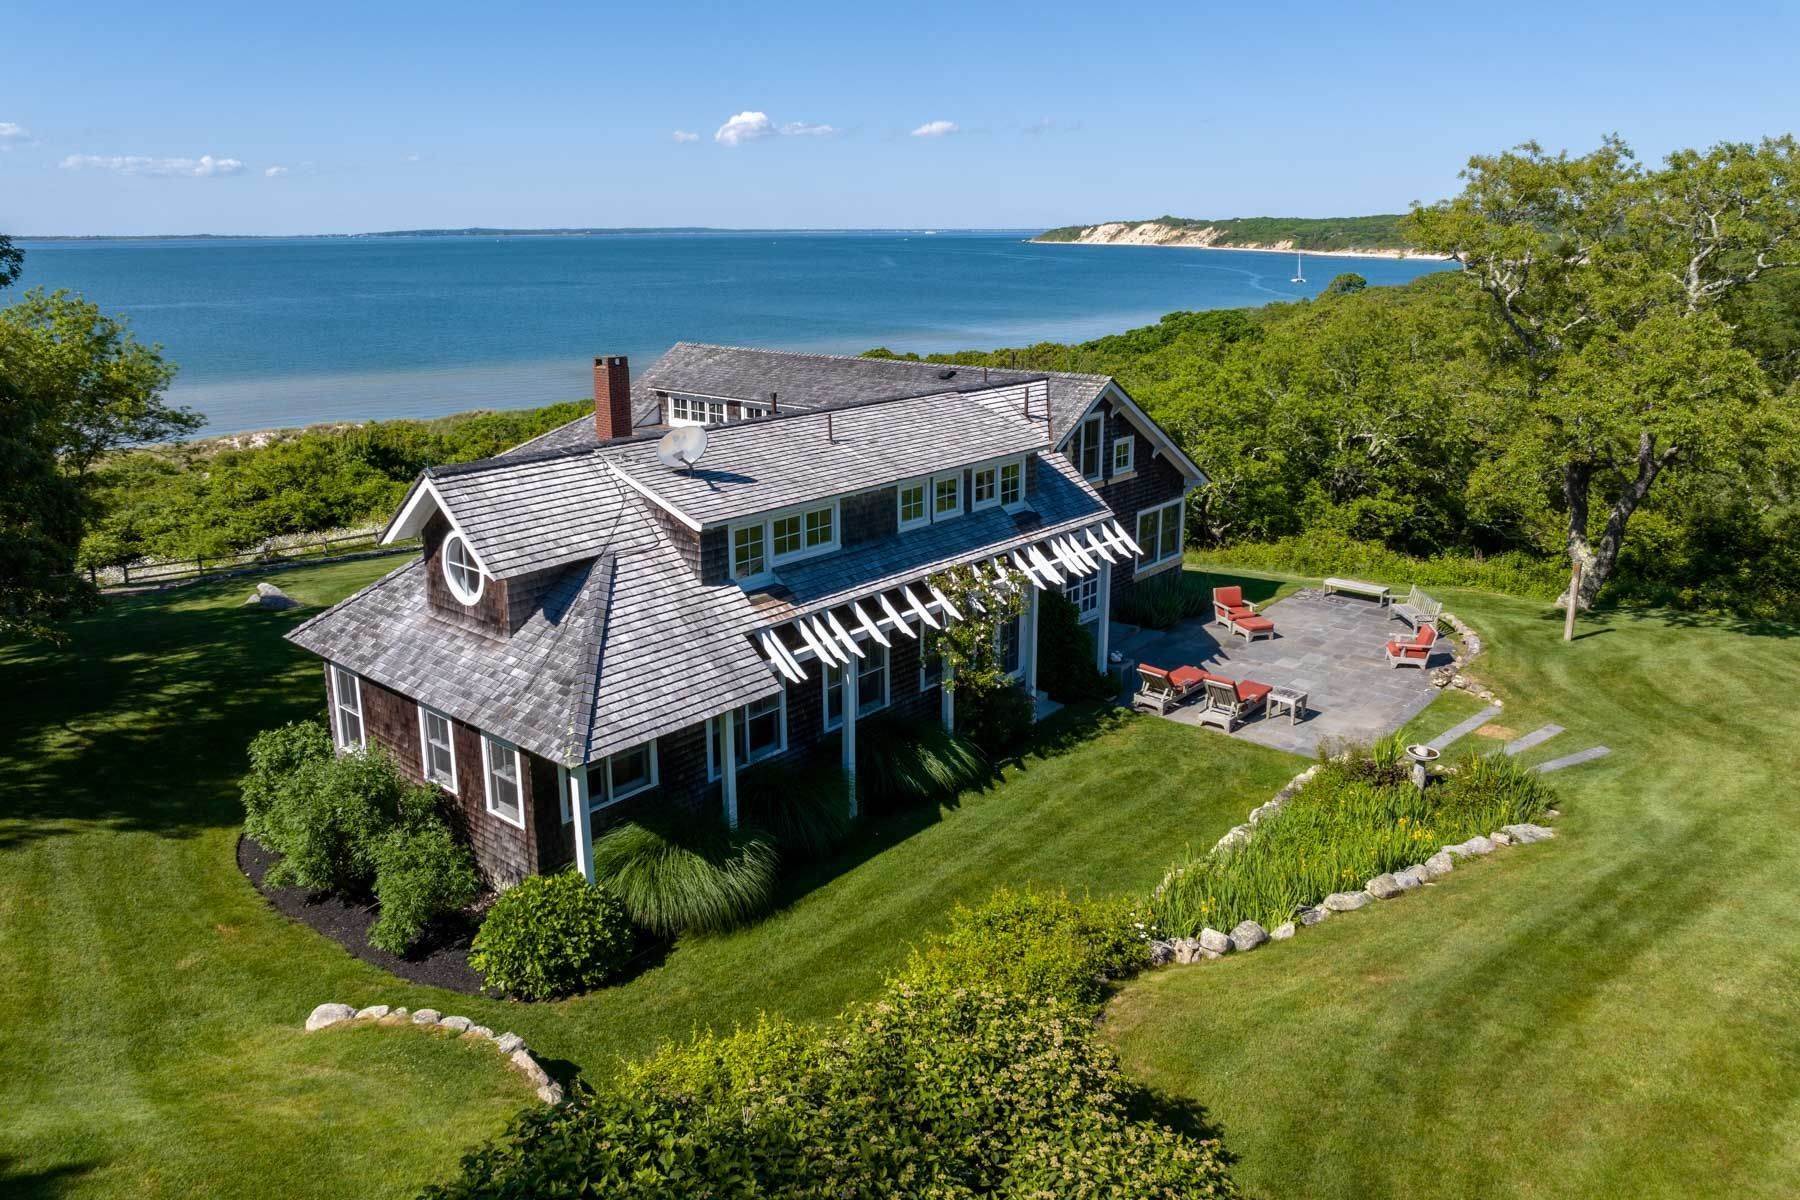 Single Family Homes for Sale at Waterfront on Vineyard Sound with Private Beach 104 Old Herring Creek Road West Tisbury, Massachusetts 02575 United States